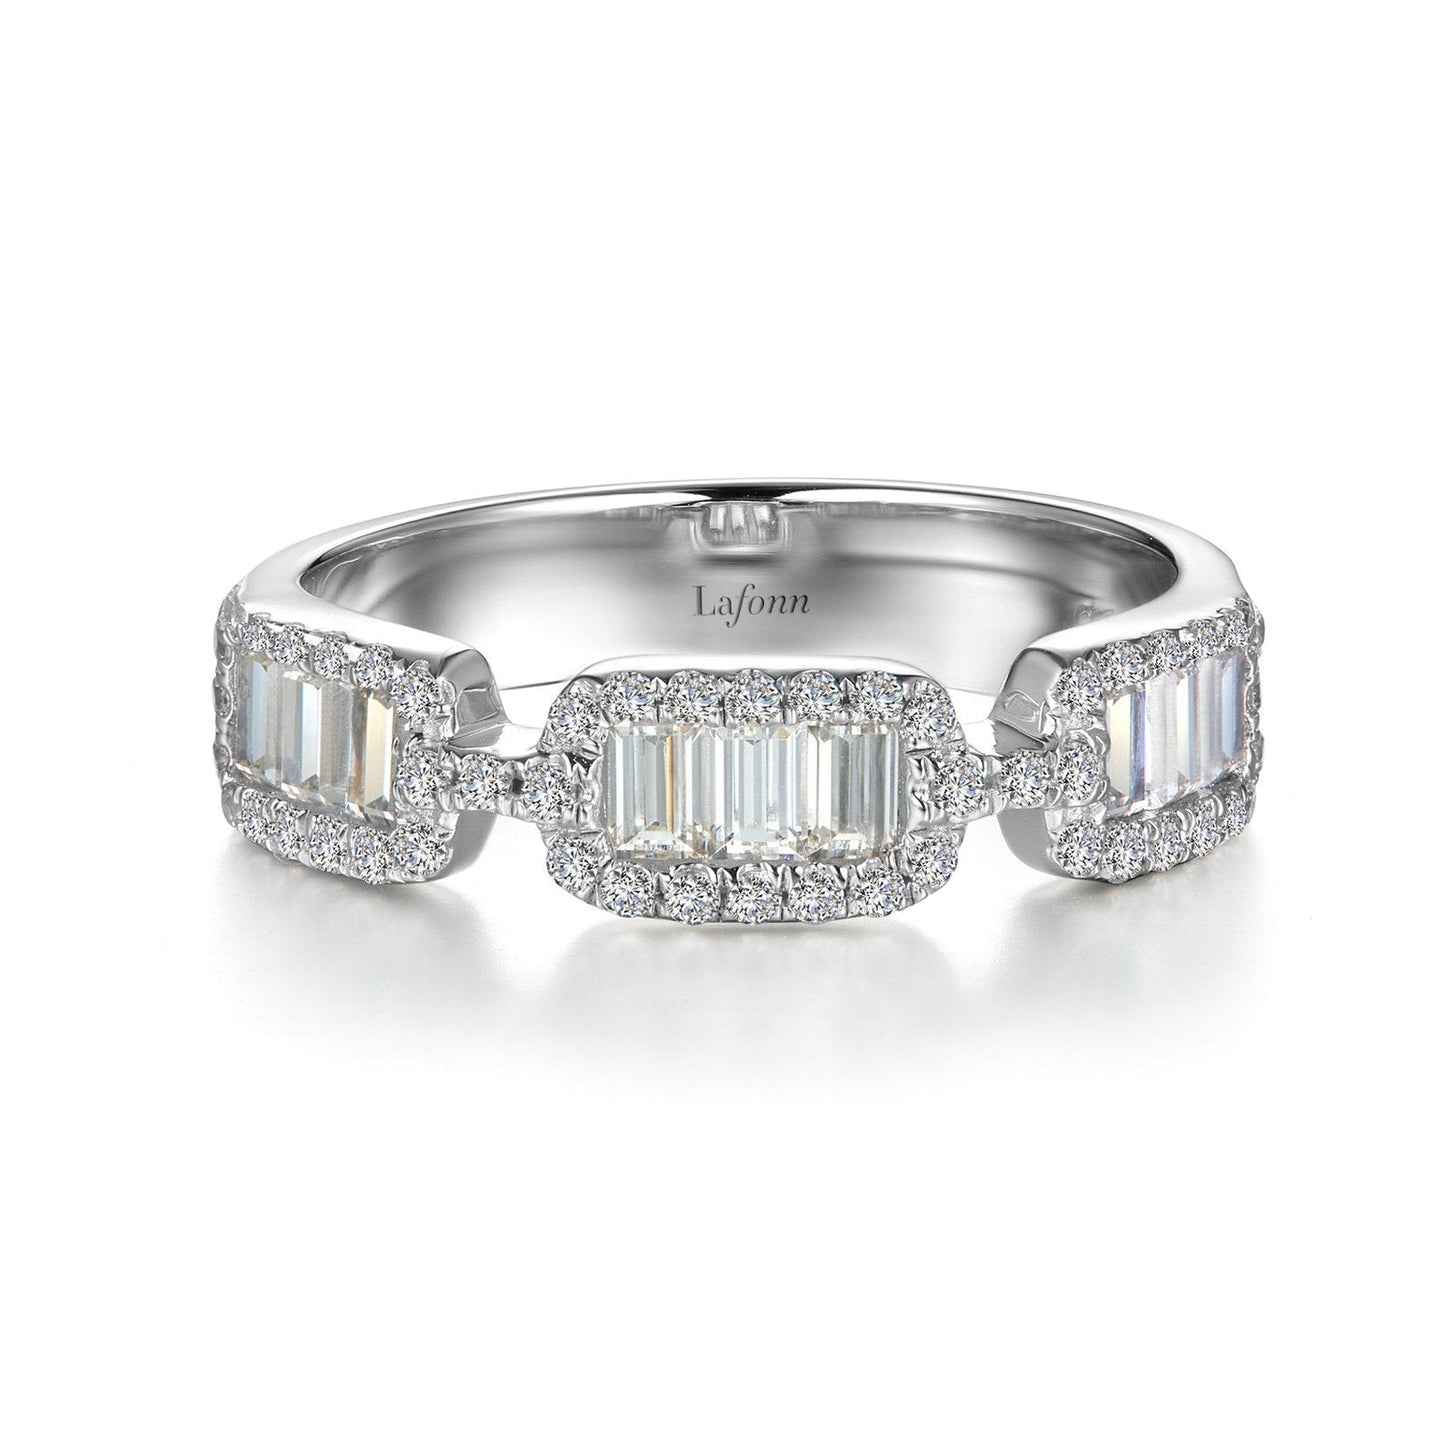 Lafonn Baguette Halo Half Eternity Band Simulated Diamond RINGS Size 9 Platinum 1.4 CTS Approx.6.00(W)